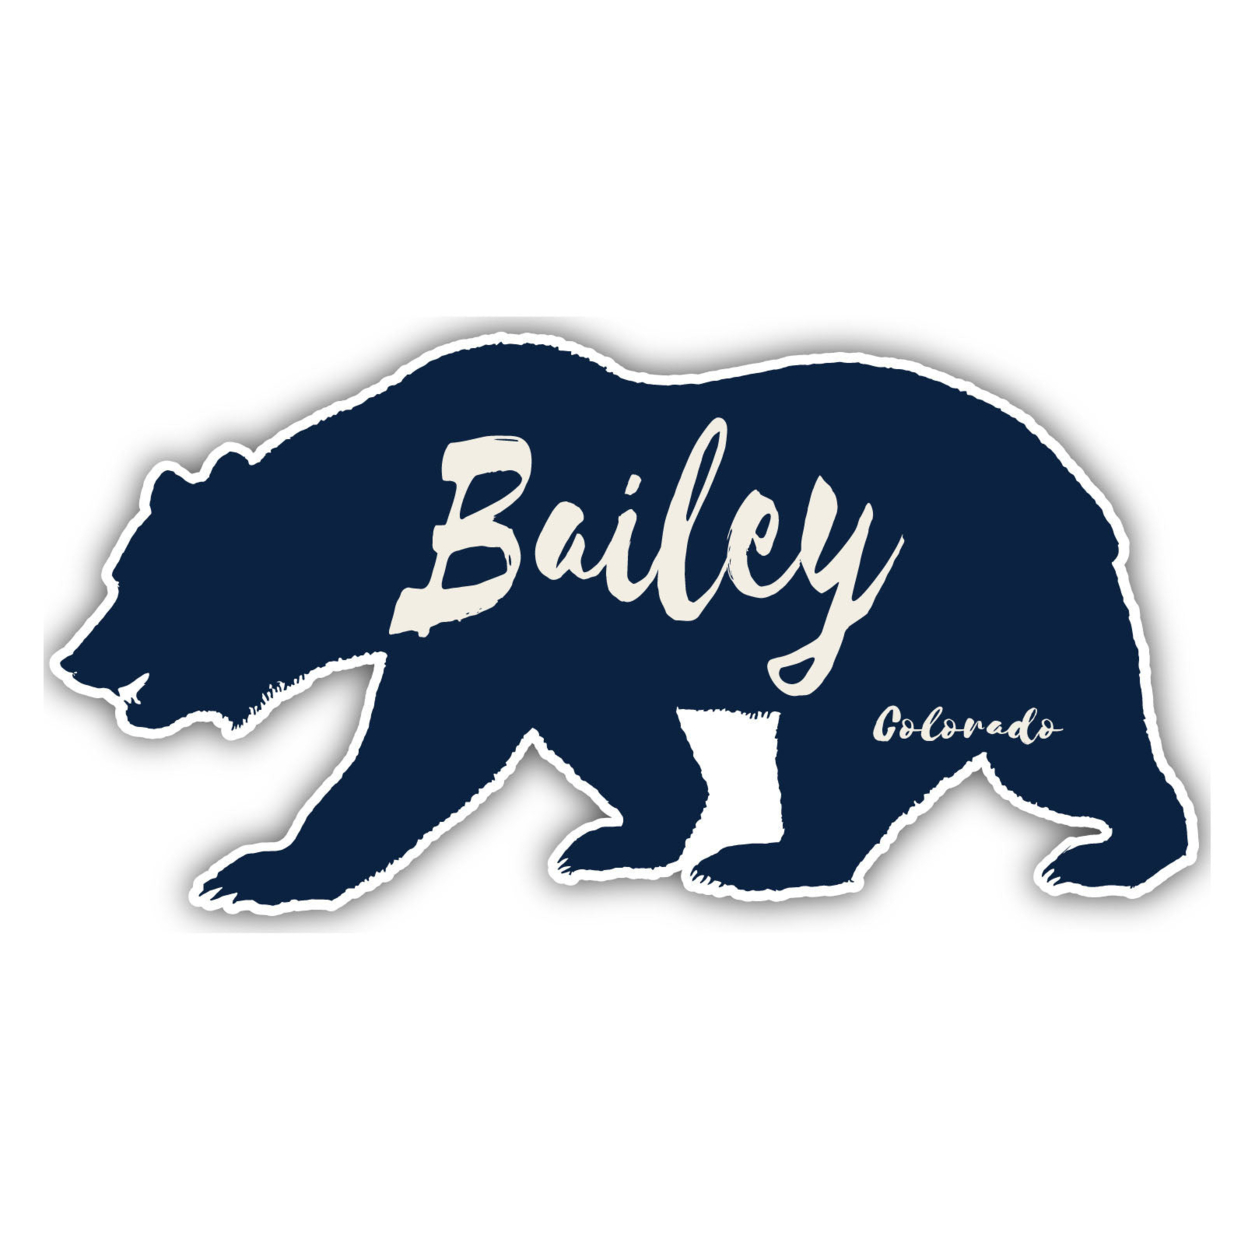 Bailey Colorado Souvenir Decorative Stickers (Choose Theme And Size) - 4-Pack, 2-Inch, Bear